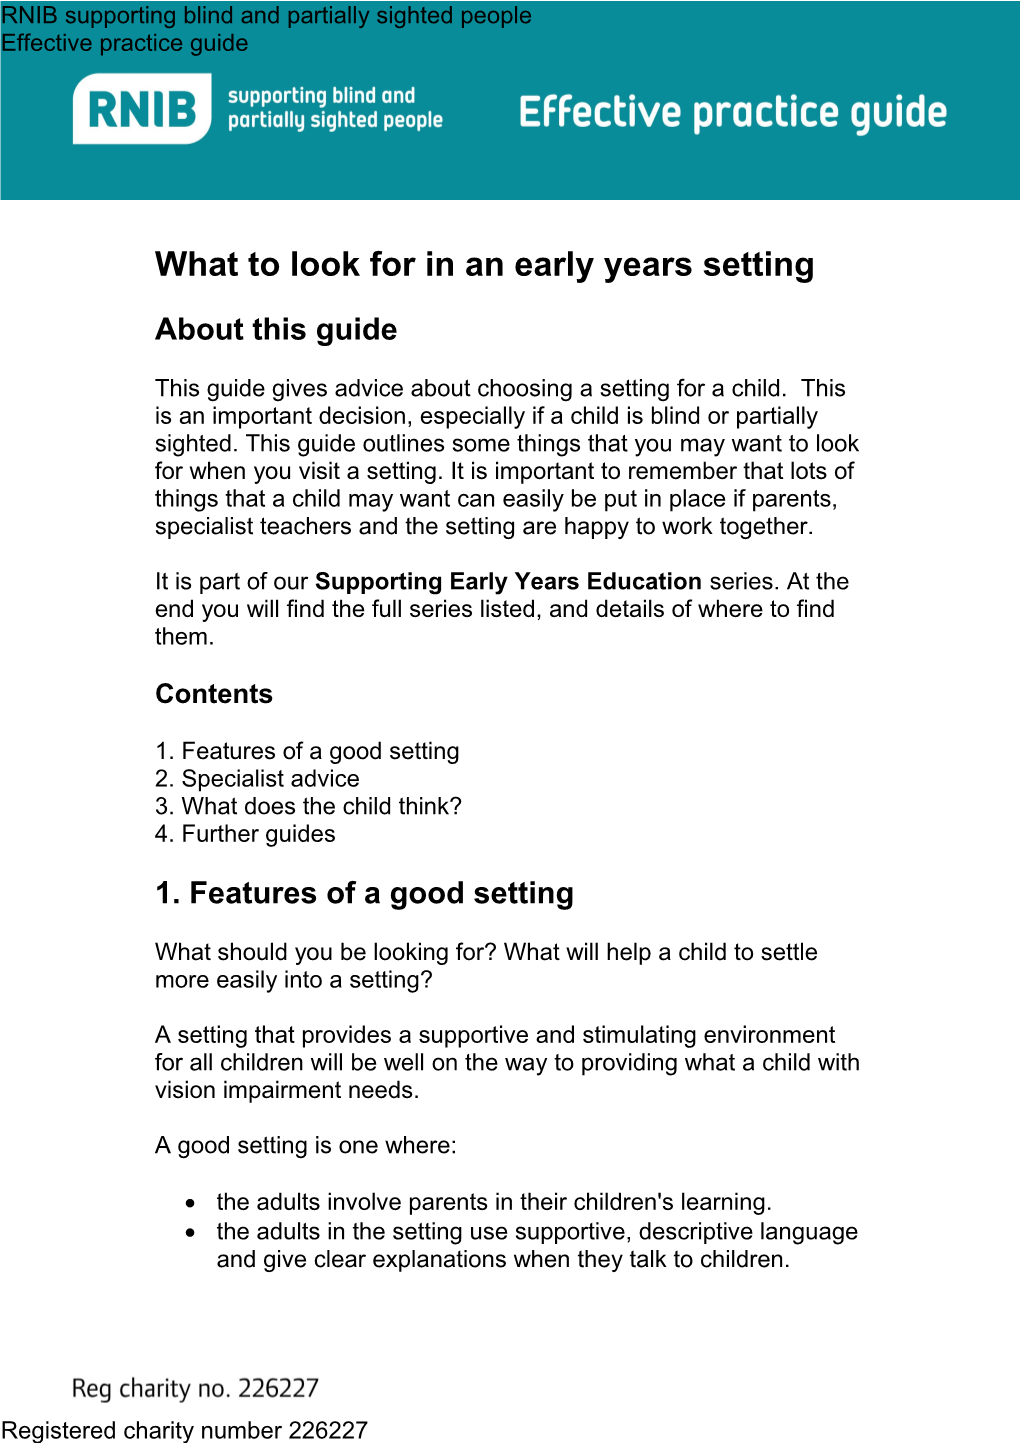 What to Look for in an Early Years Setting